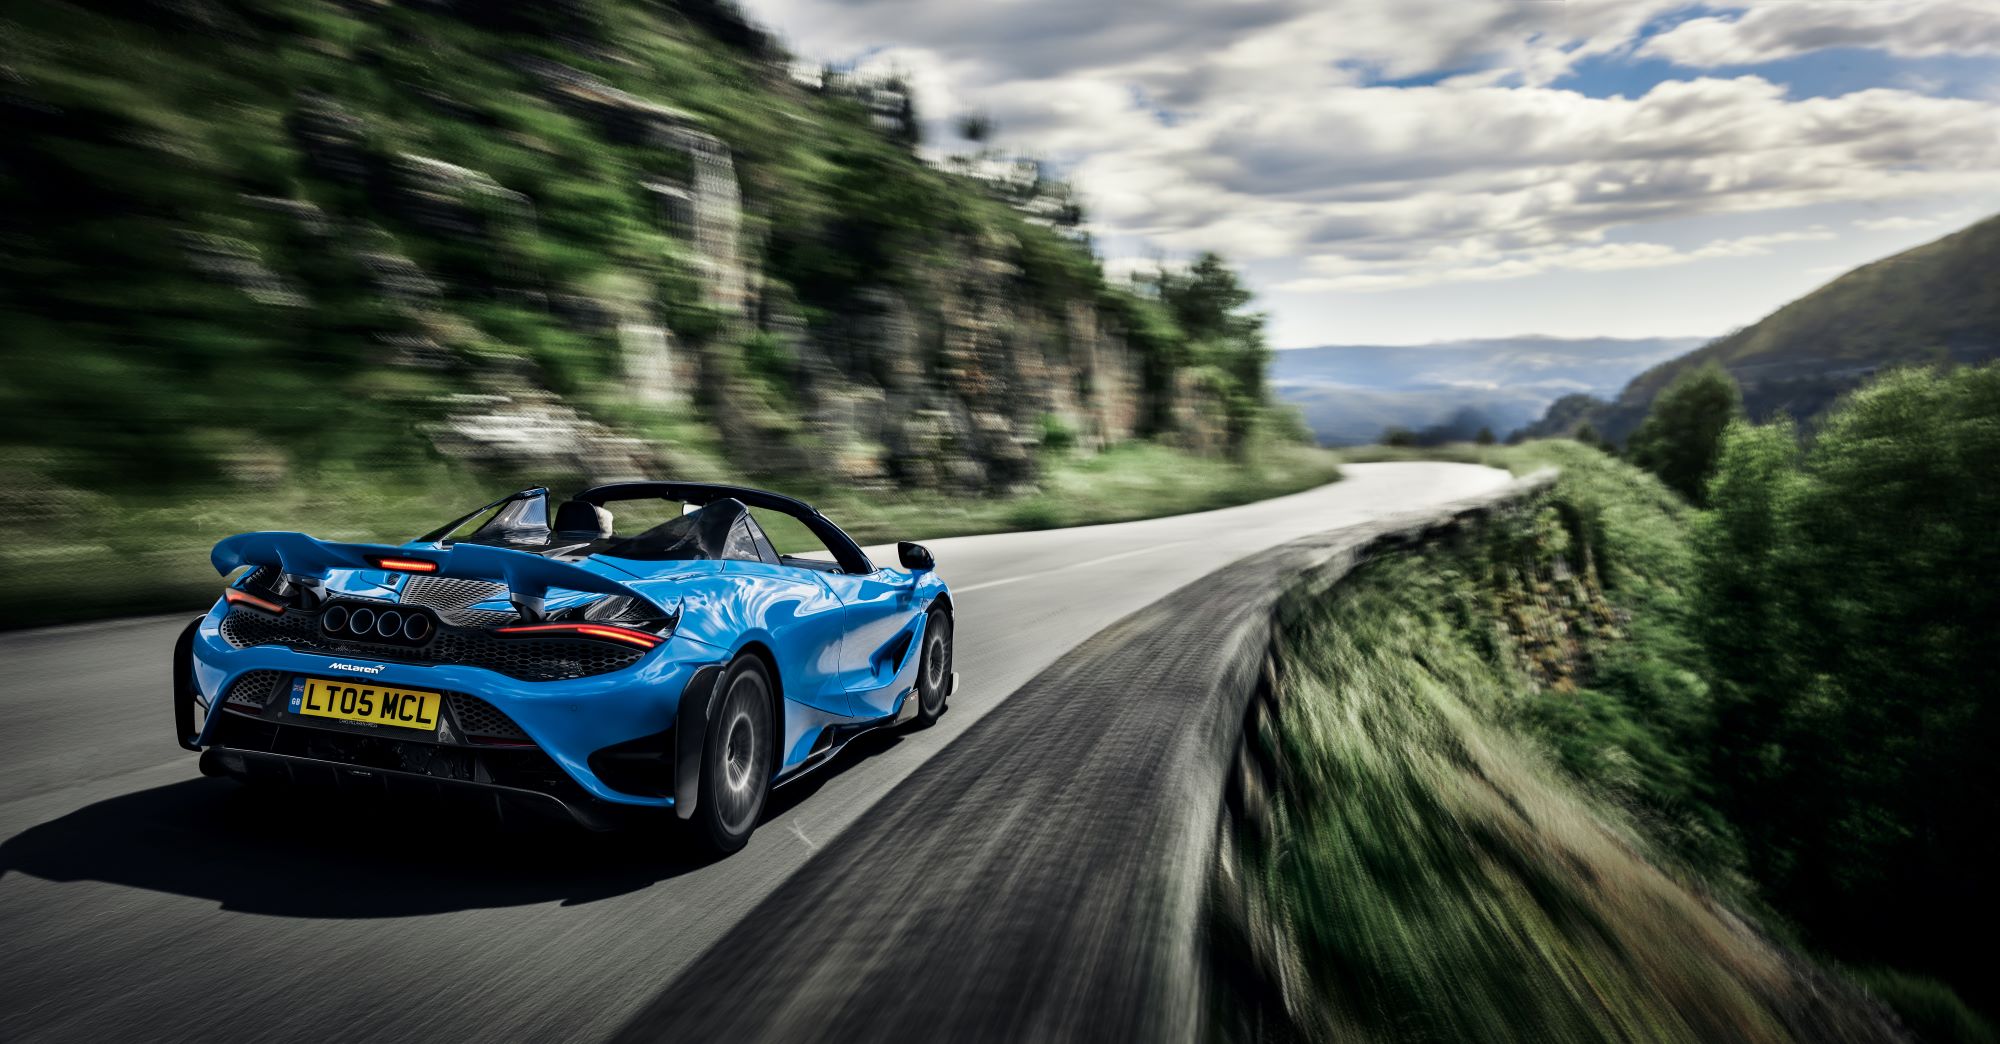 The McLaren 765LT Spider in blue driving down a country highway near cliffs